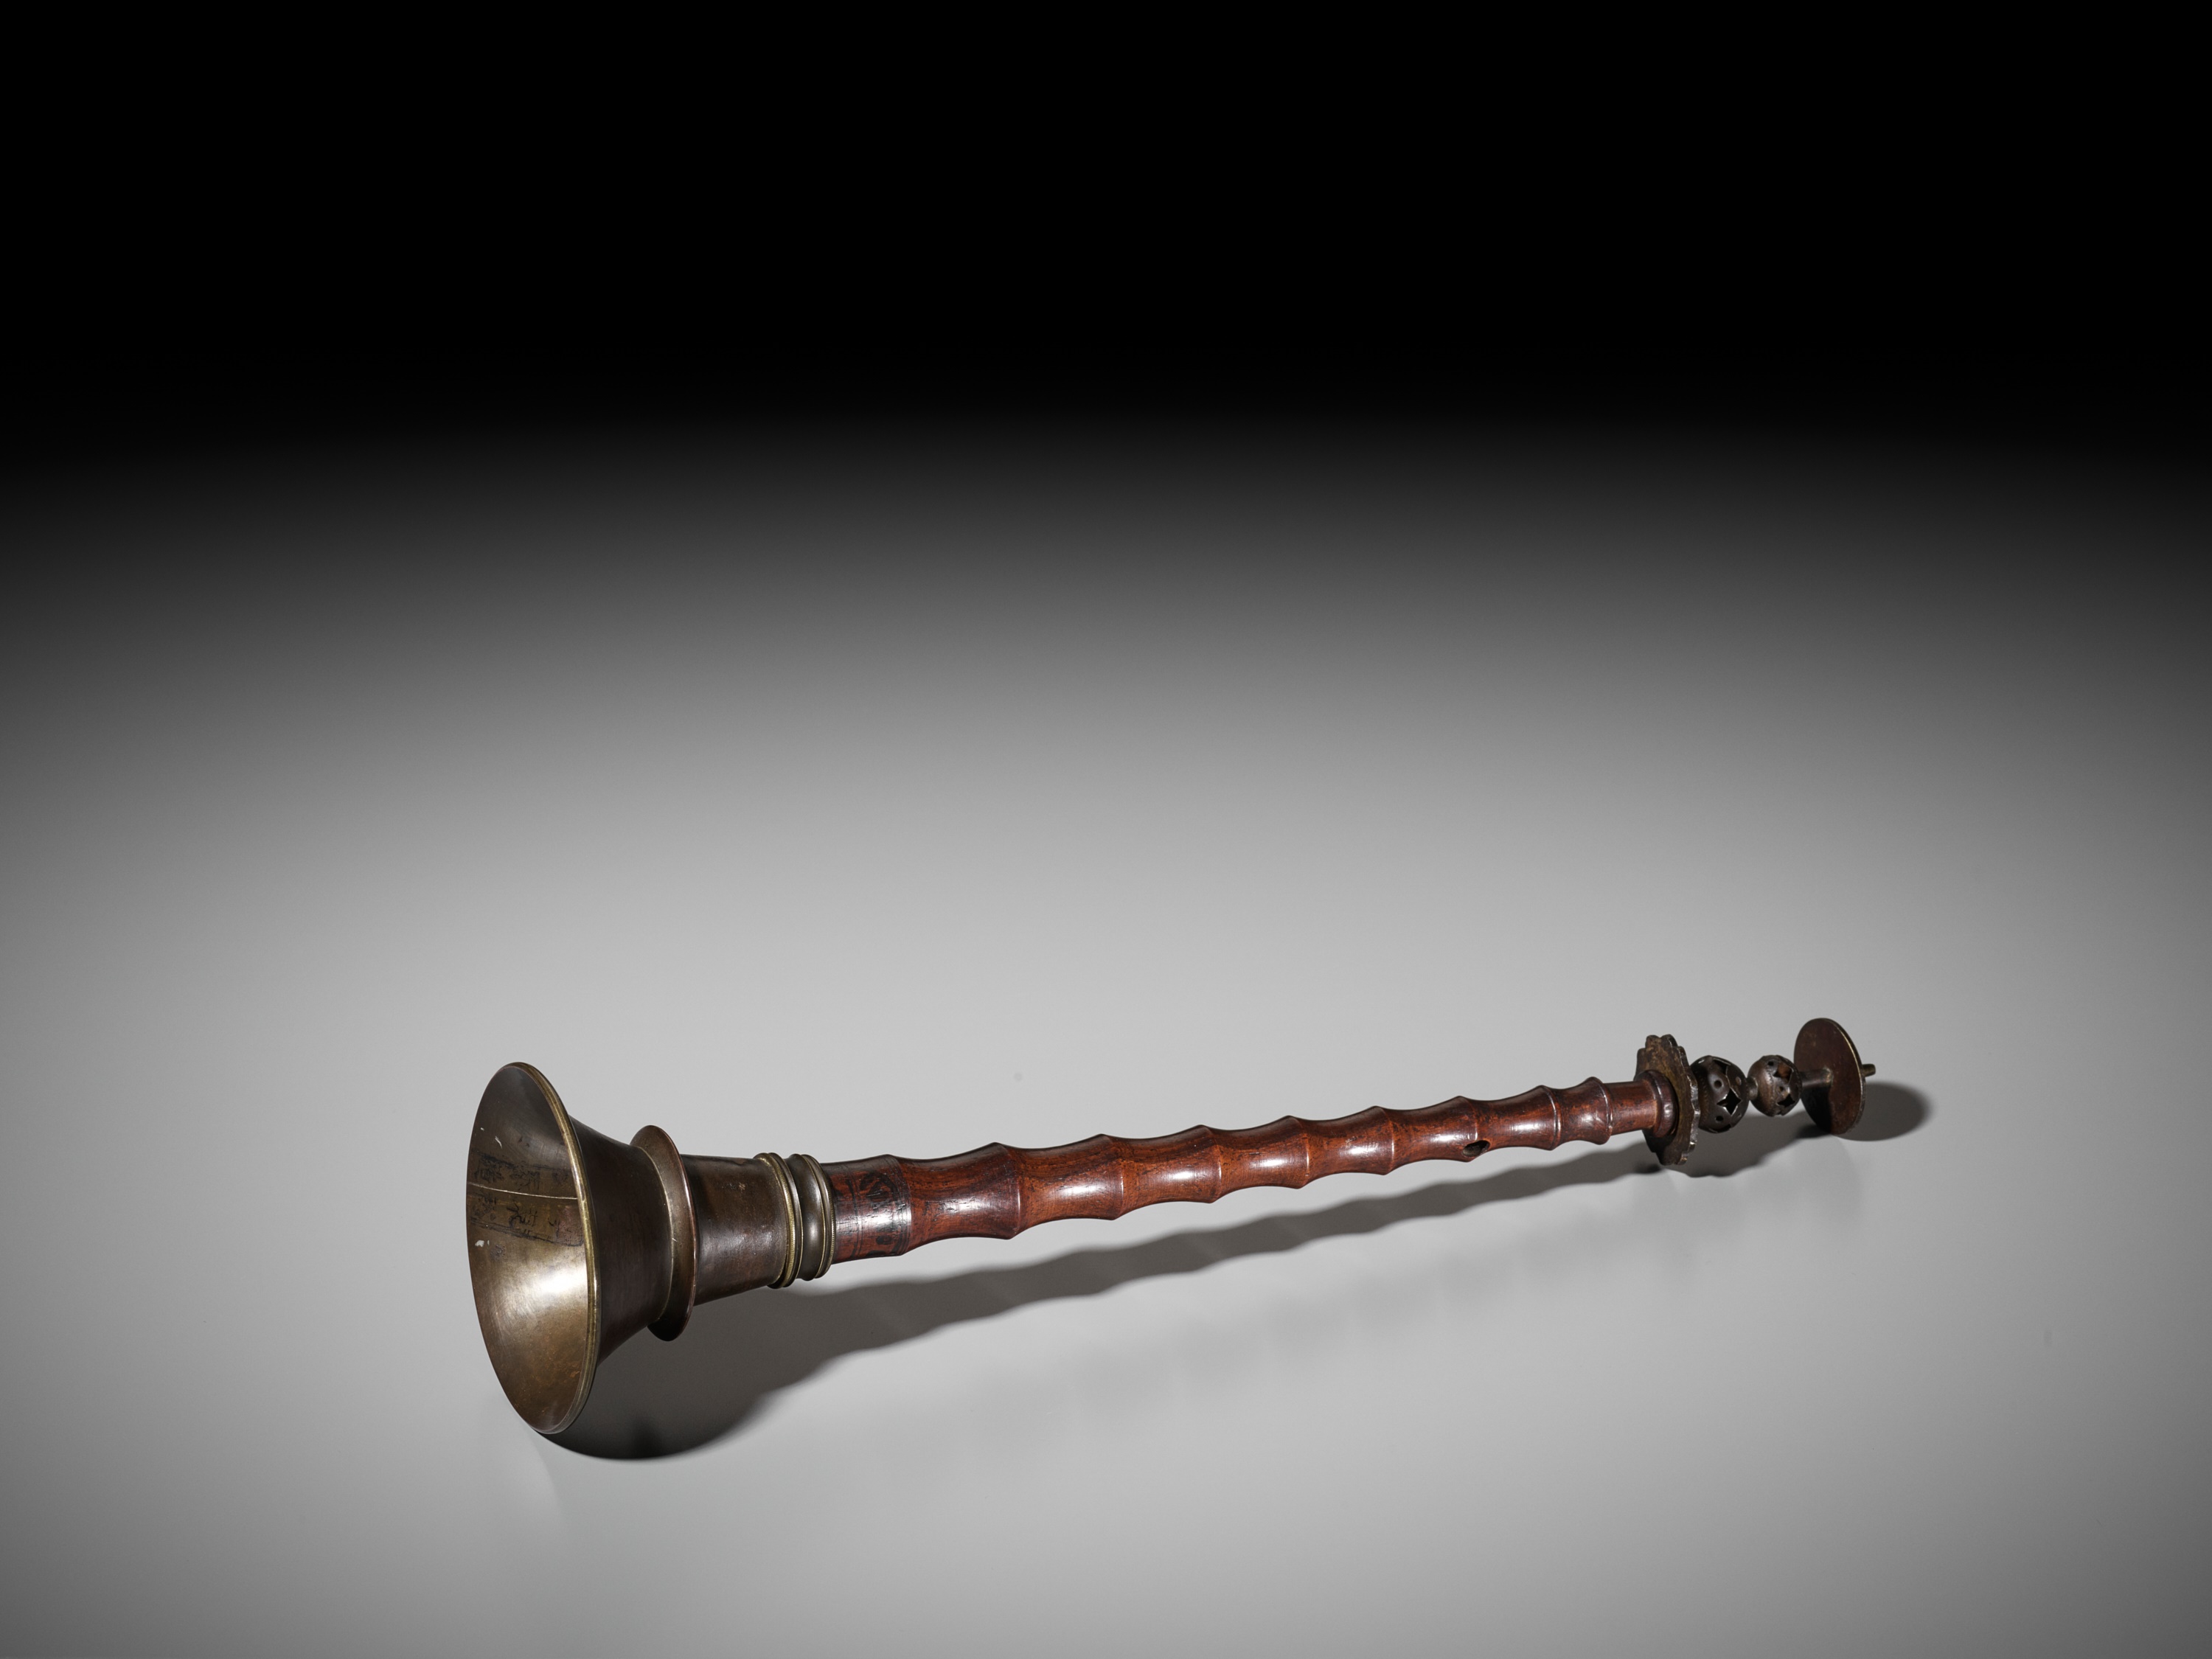 A BRASS AND WOOD OBOE, HAIDI, 18TH-19TH CENTURY - Image 7 of 9